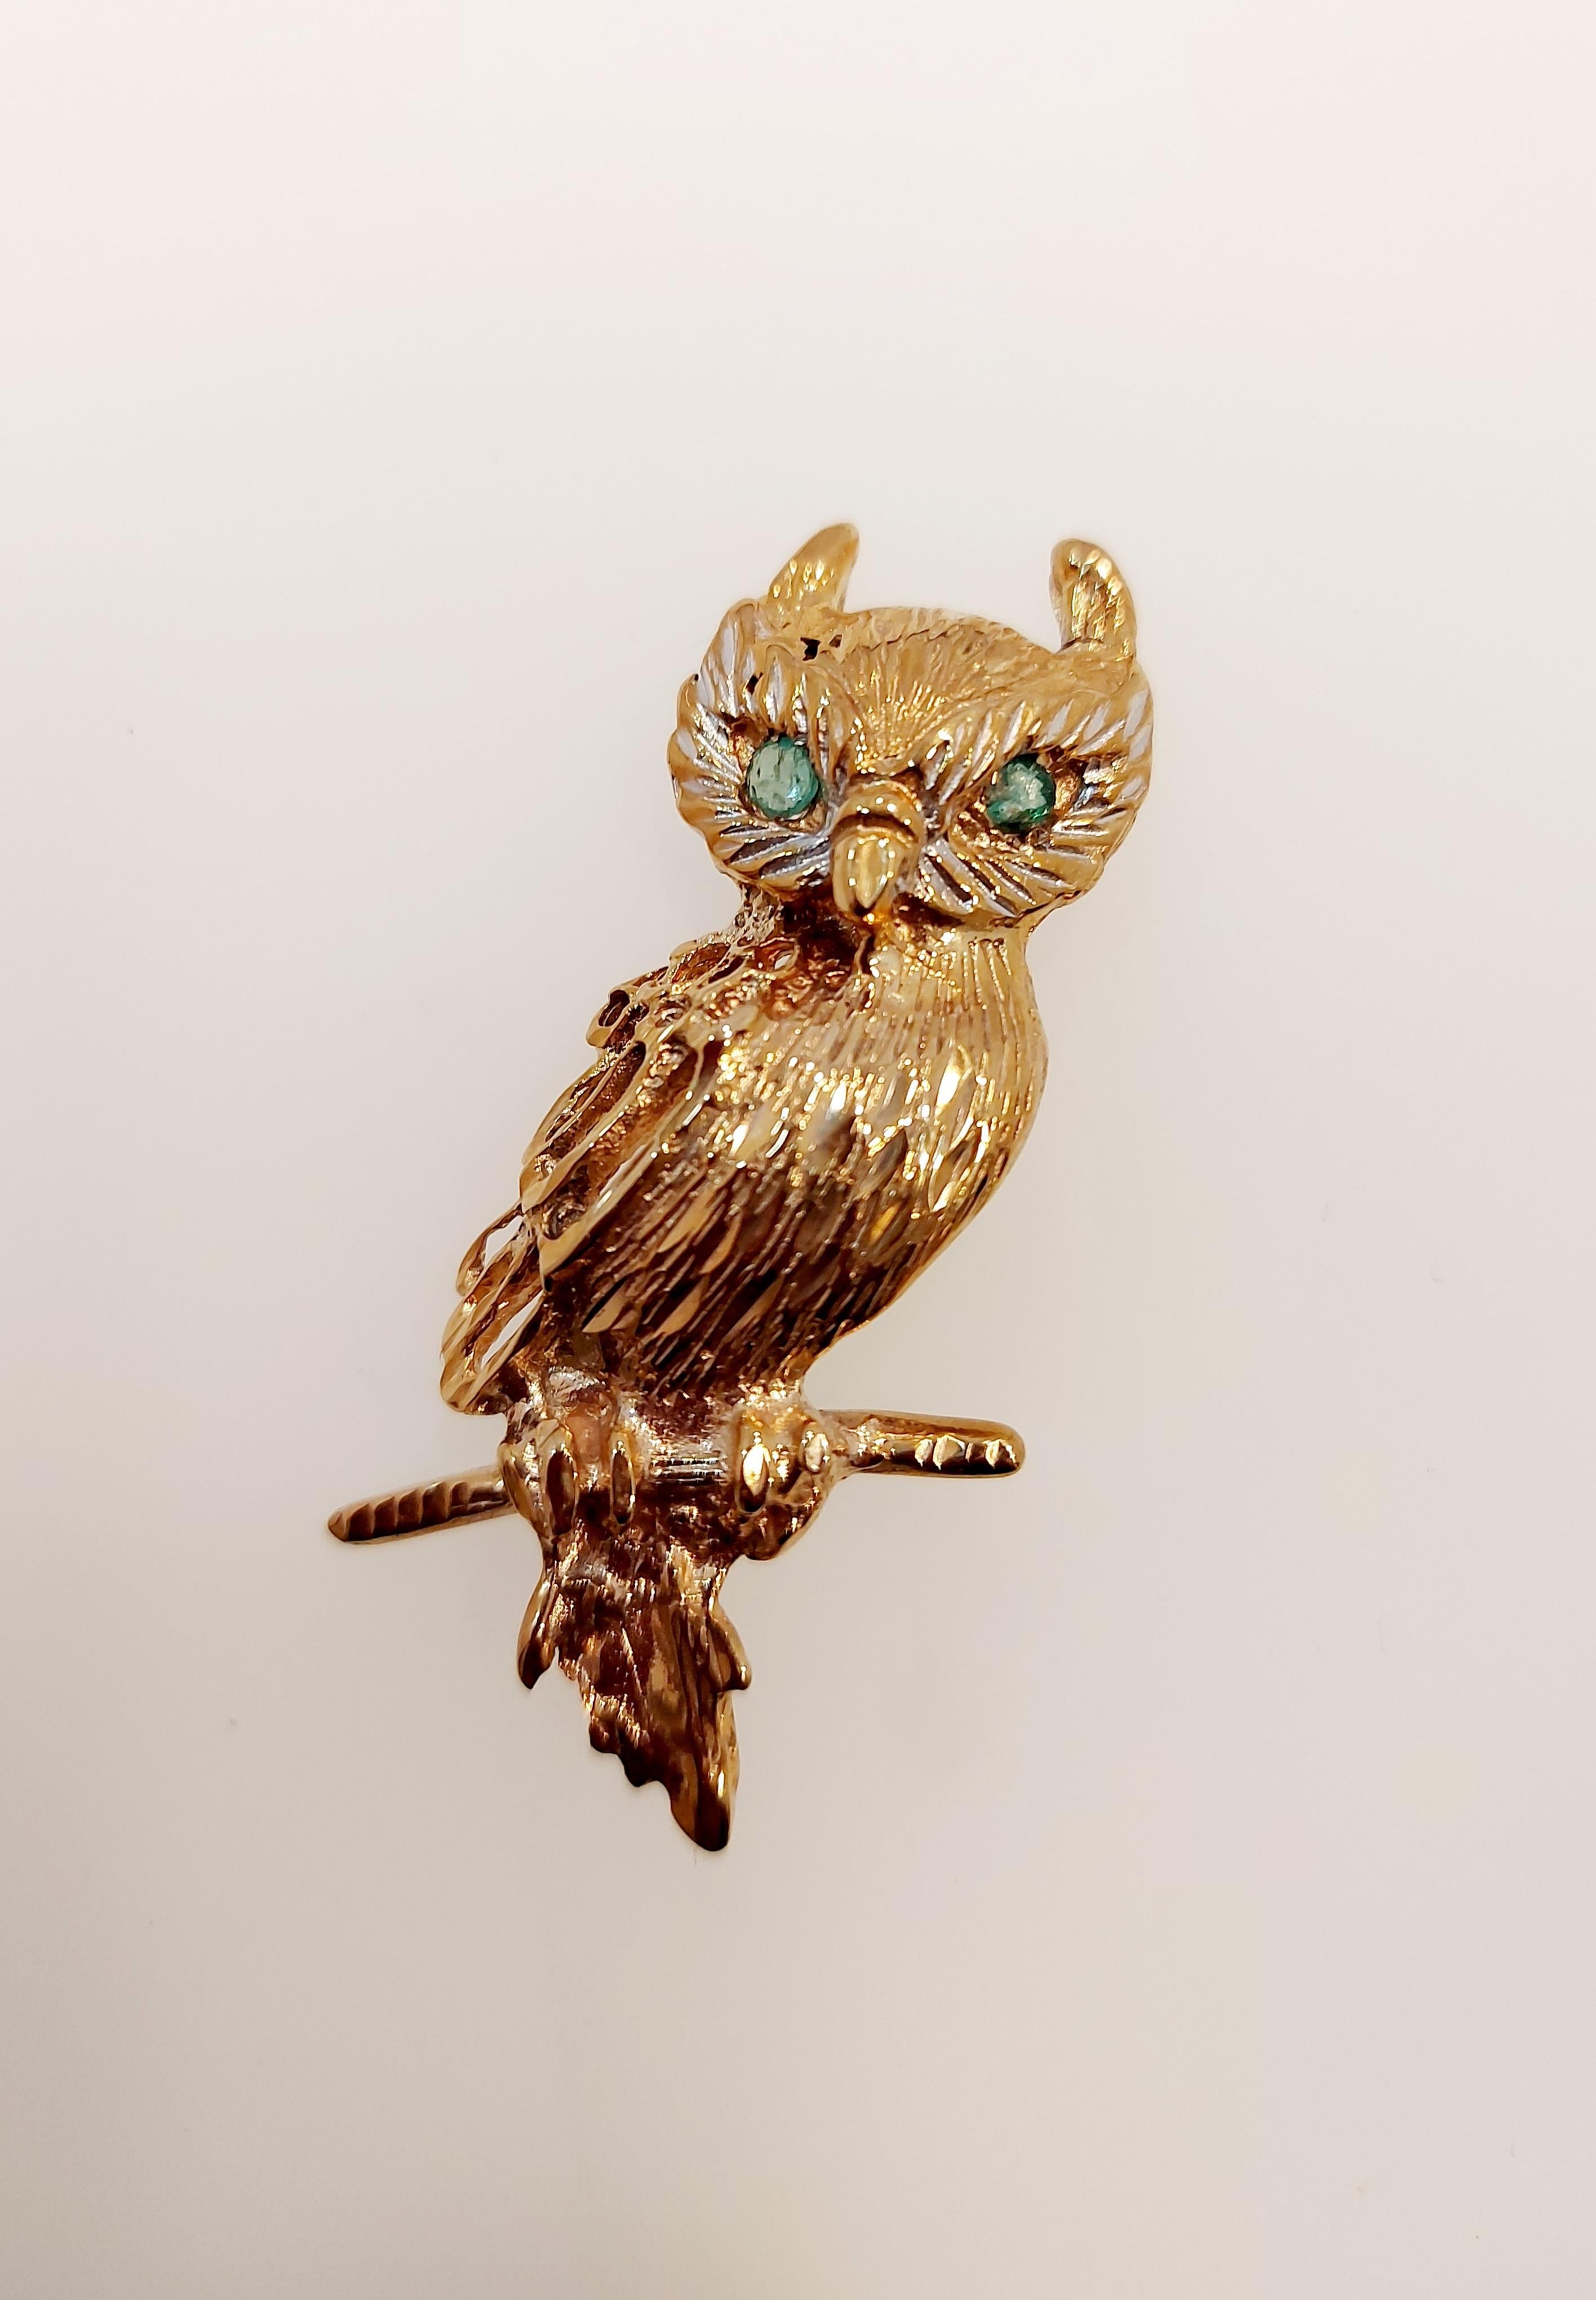 An owl brooch with emerald eyes hallmarked 9ct gold, textured feather detail perched on a gold branch. With pale green emerald eyes, assayed at Birmingham in 1989.